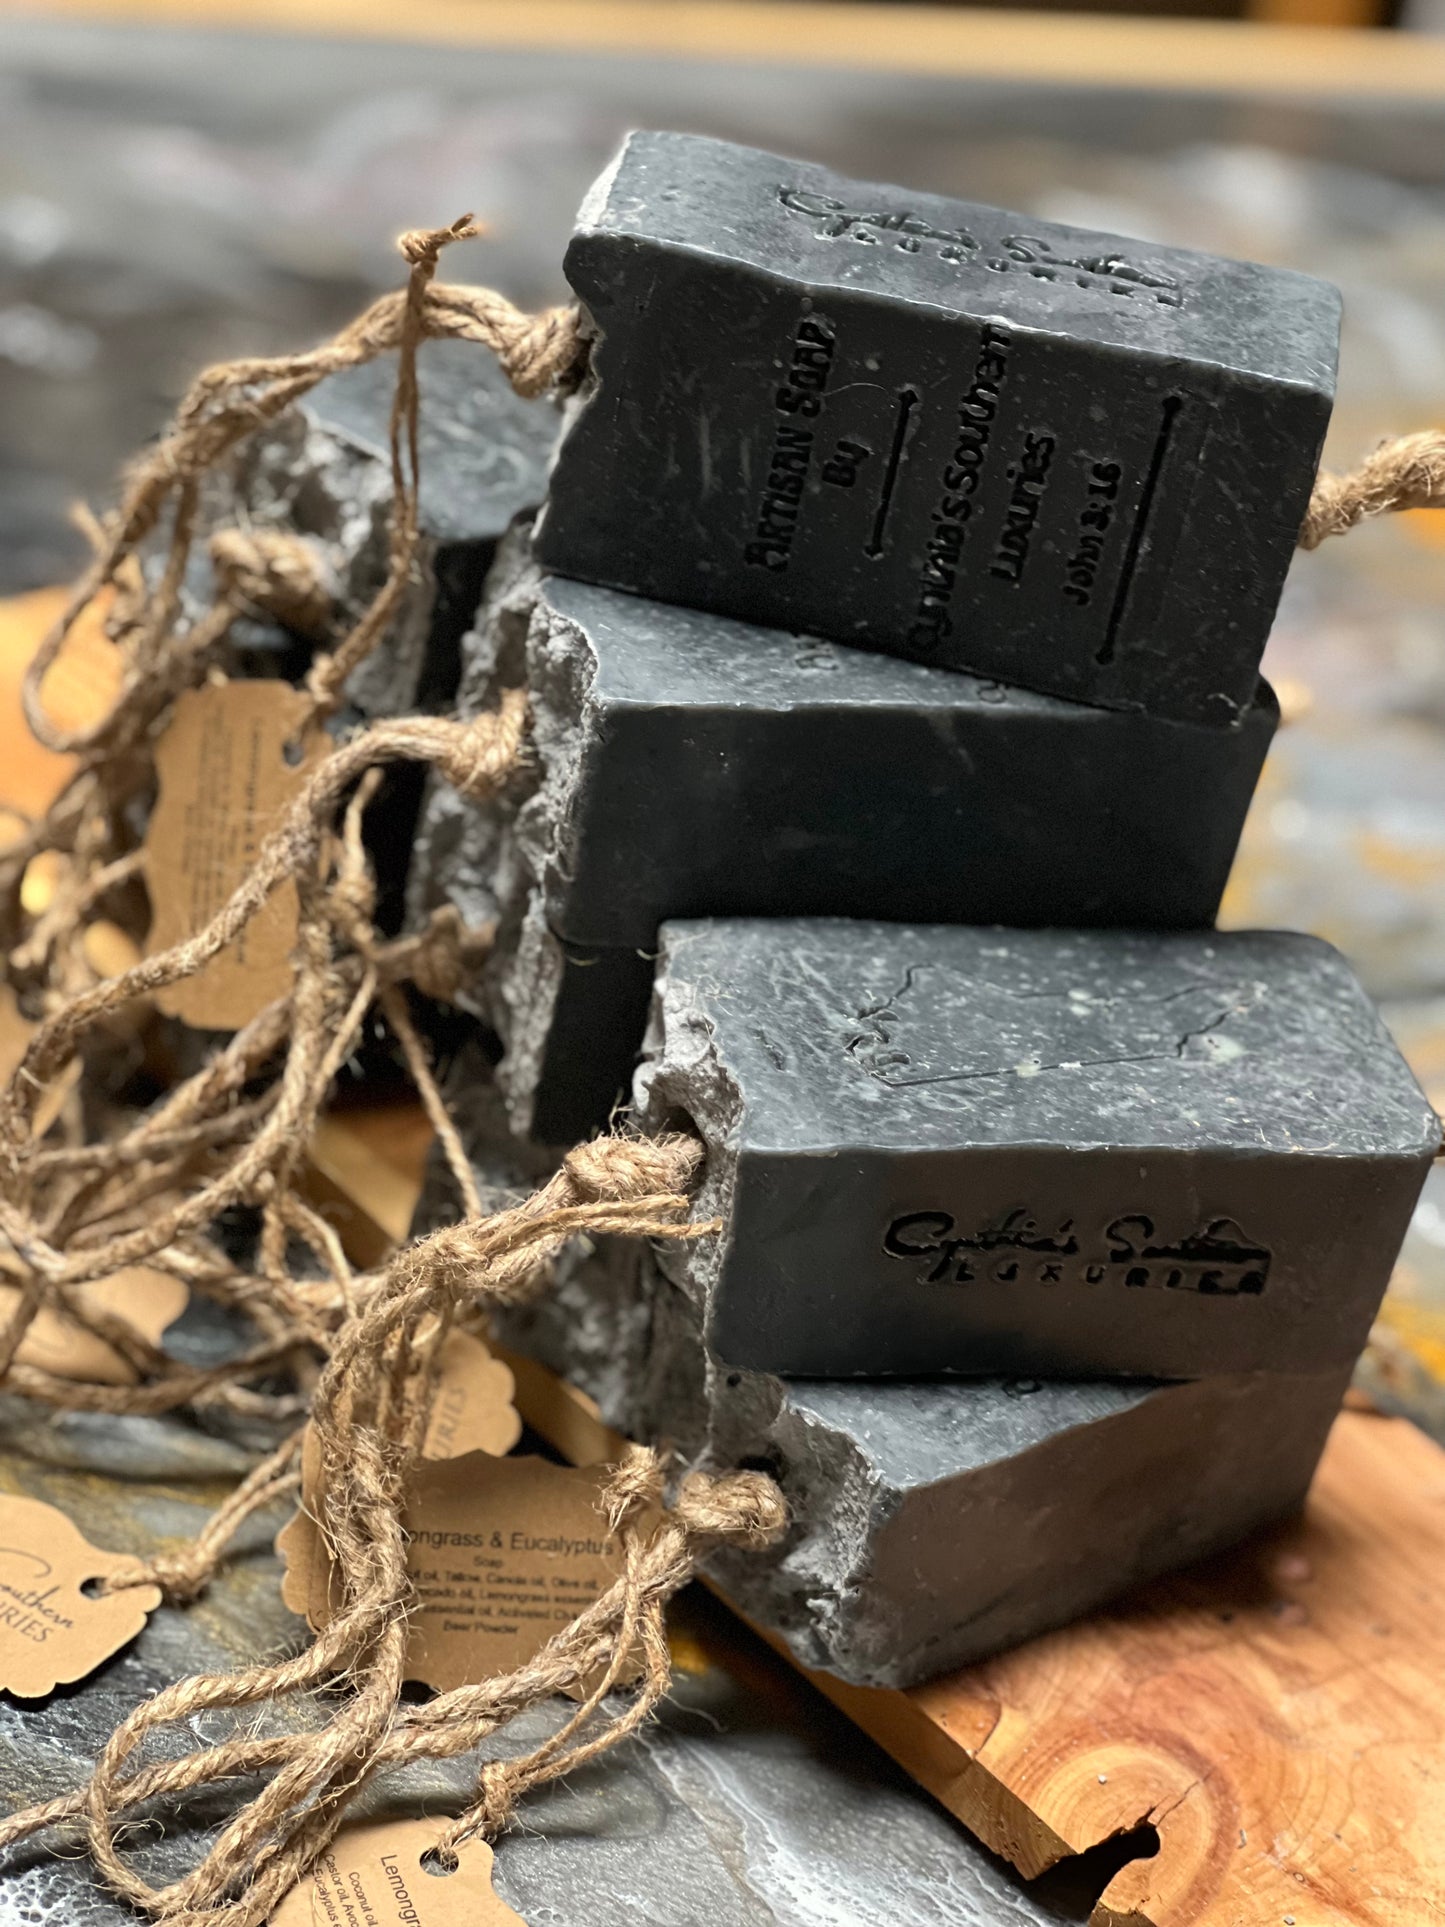 Lemongrass, Eucalyptus, Activated charcoal & Beer soap